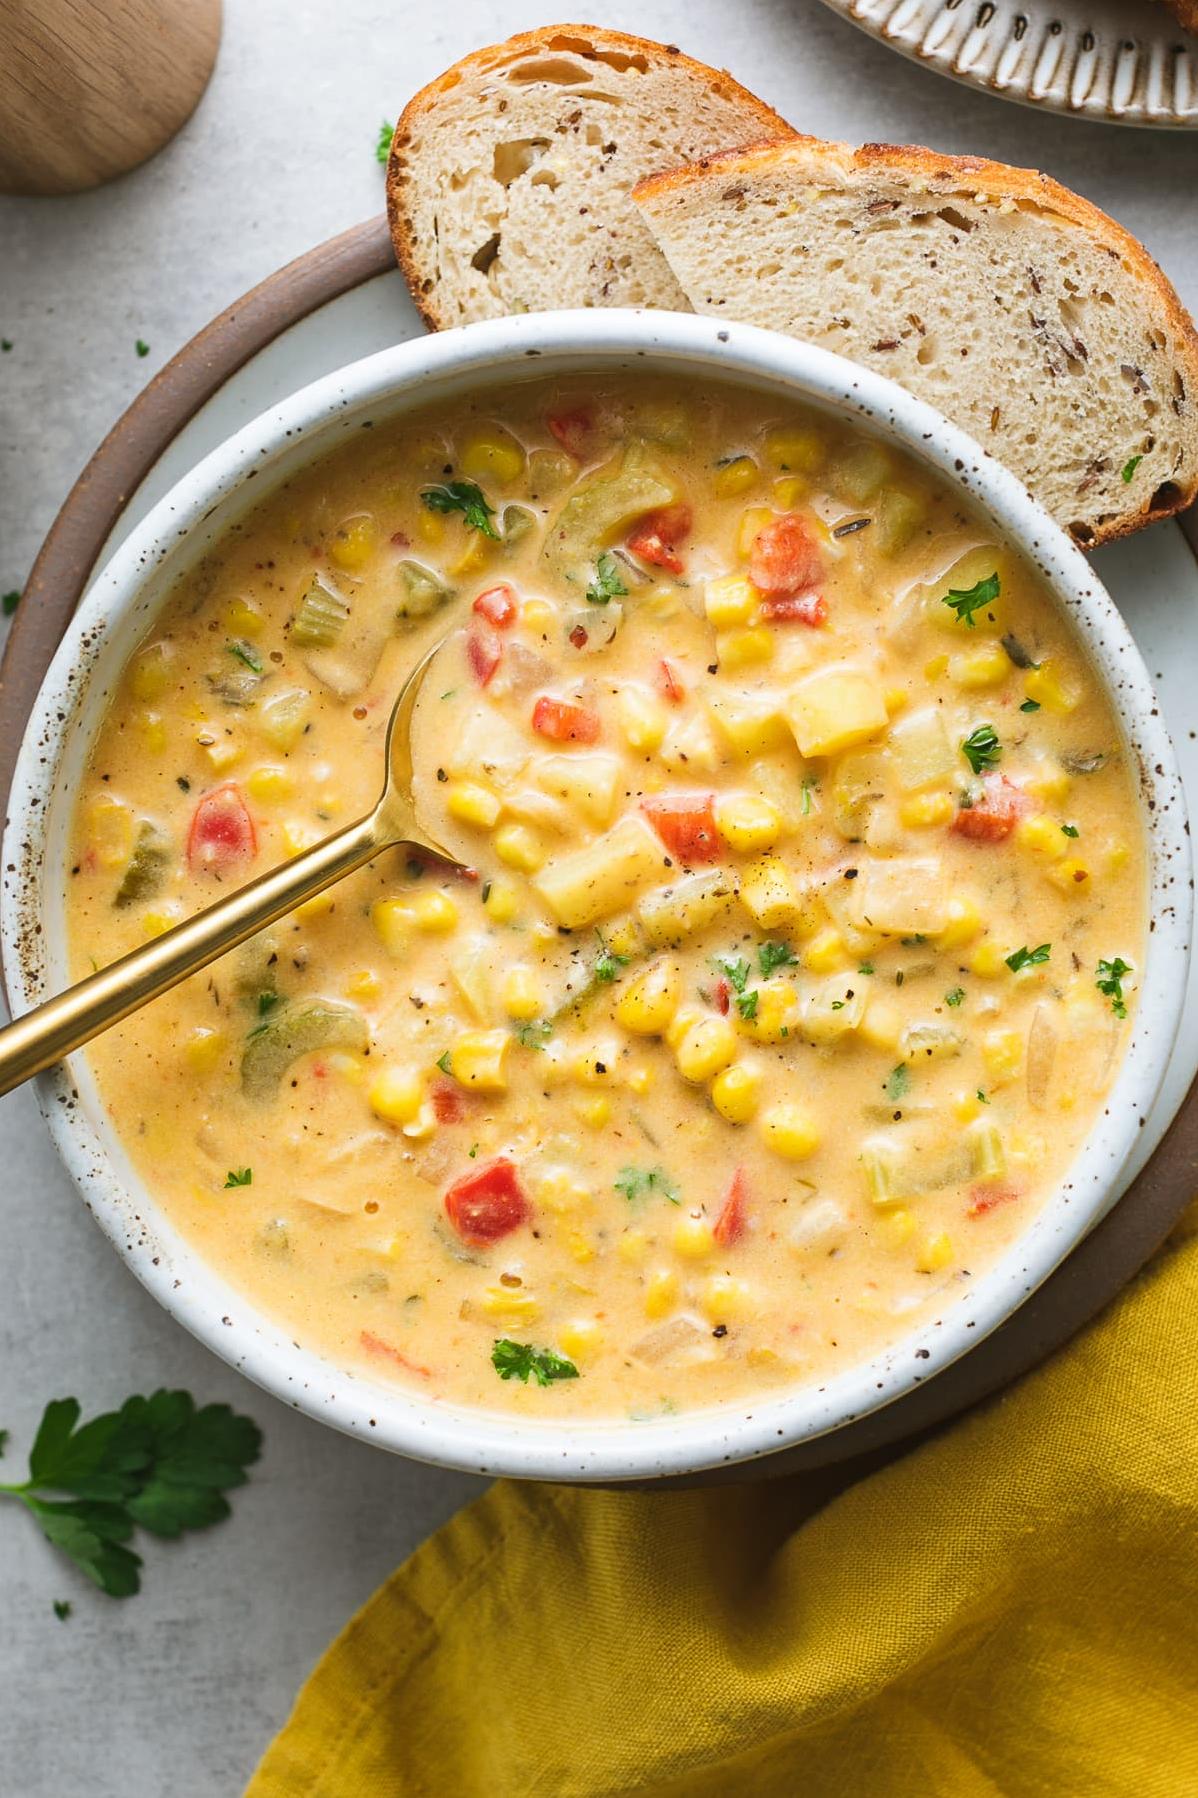  Potato, corn, and an array of fresh vegetables come together in a tantalizingly tasty soup.